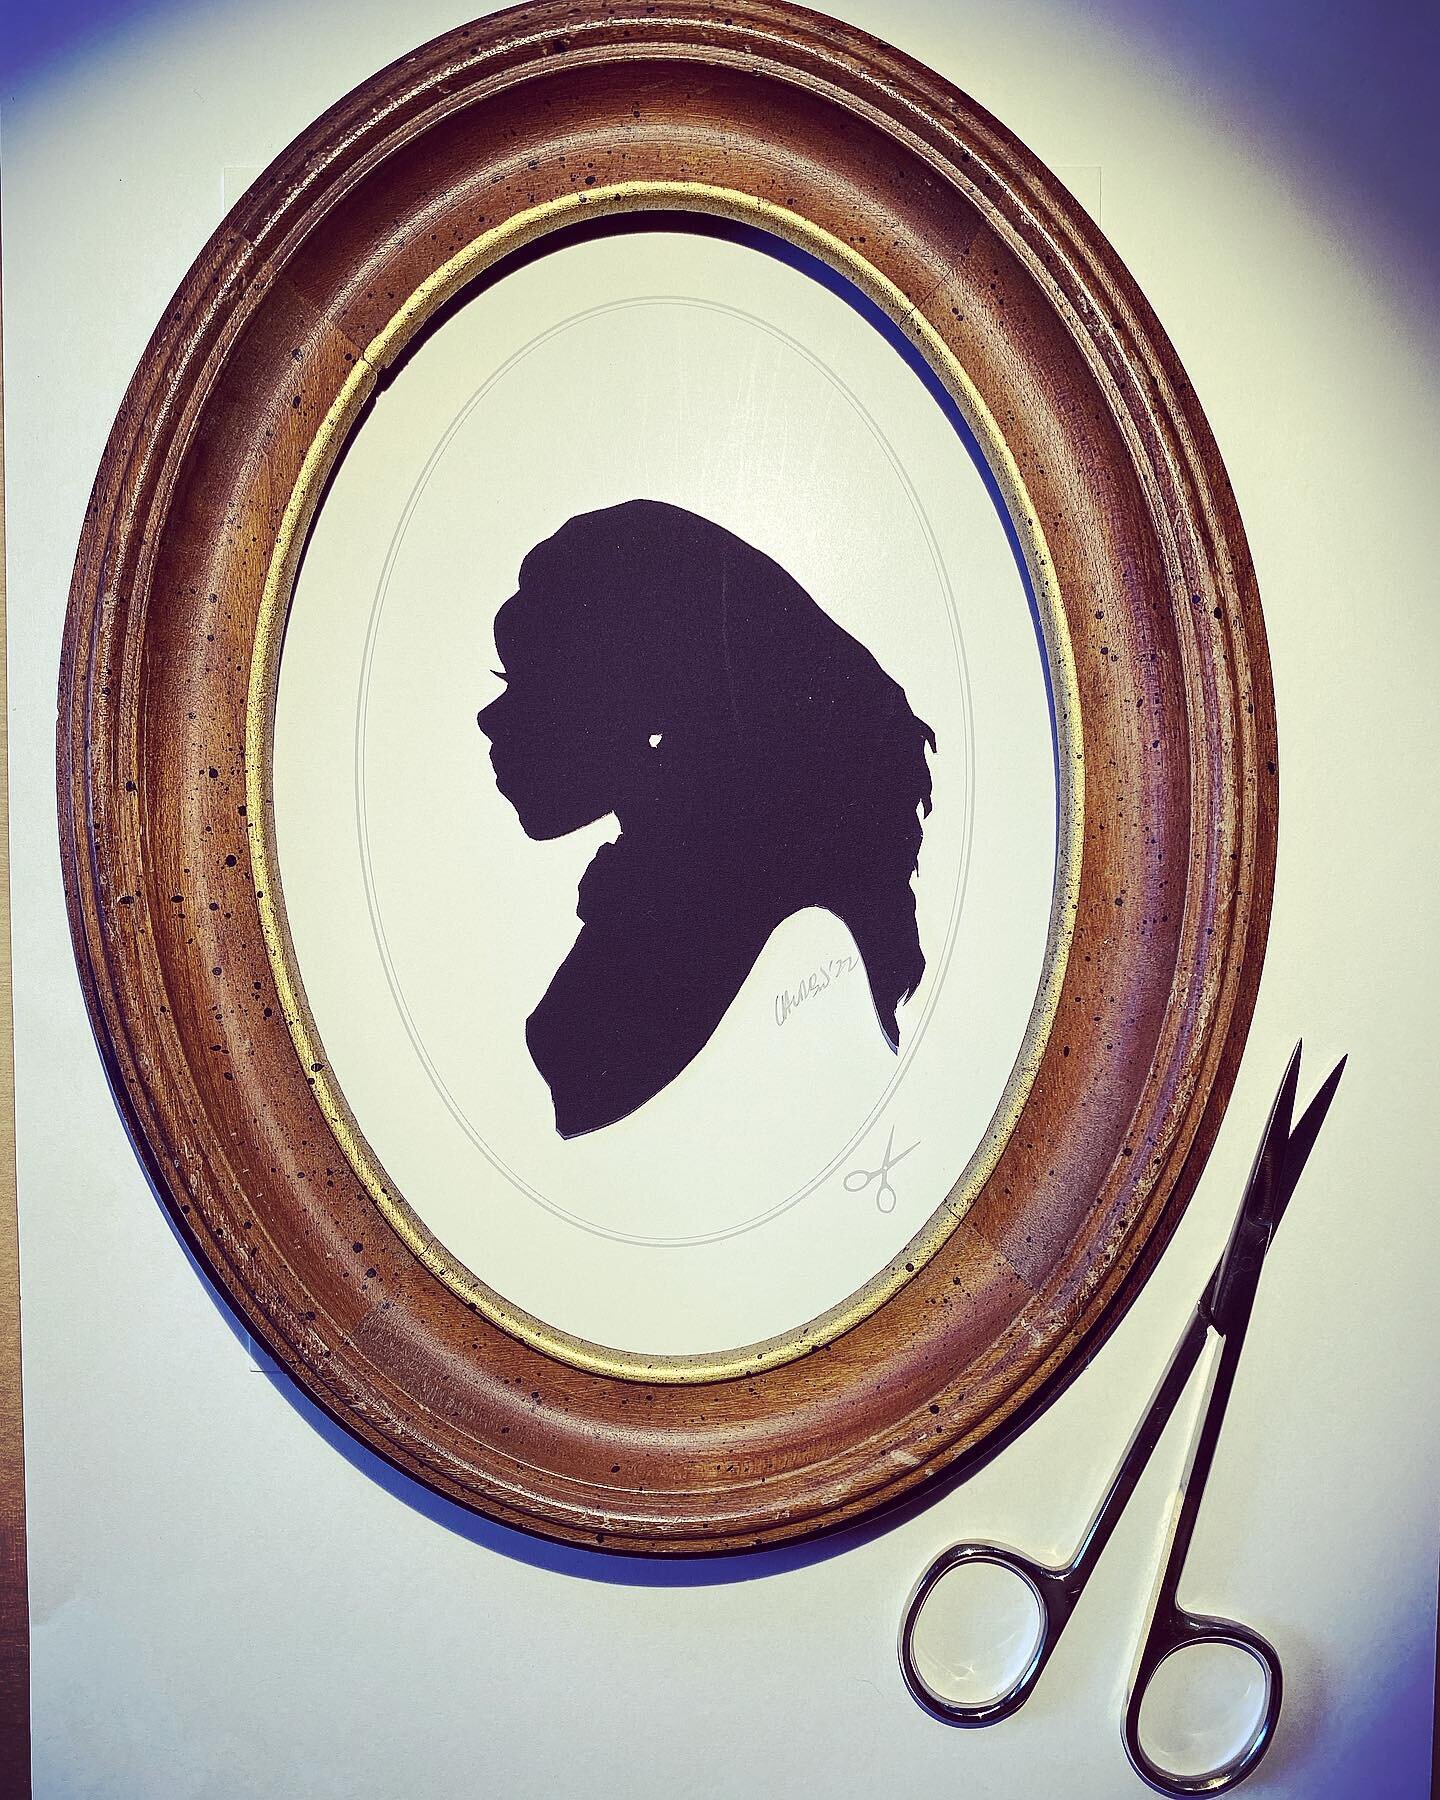 A stunning guest at a corporate celebration stood for her silhouette portrait for less than 2 minutes (other guests were timing me!) and created this classic memory of her experience and her beauty. 
.
Cut freehand by me, with only ✂️ at @njimedia 's